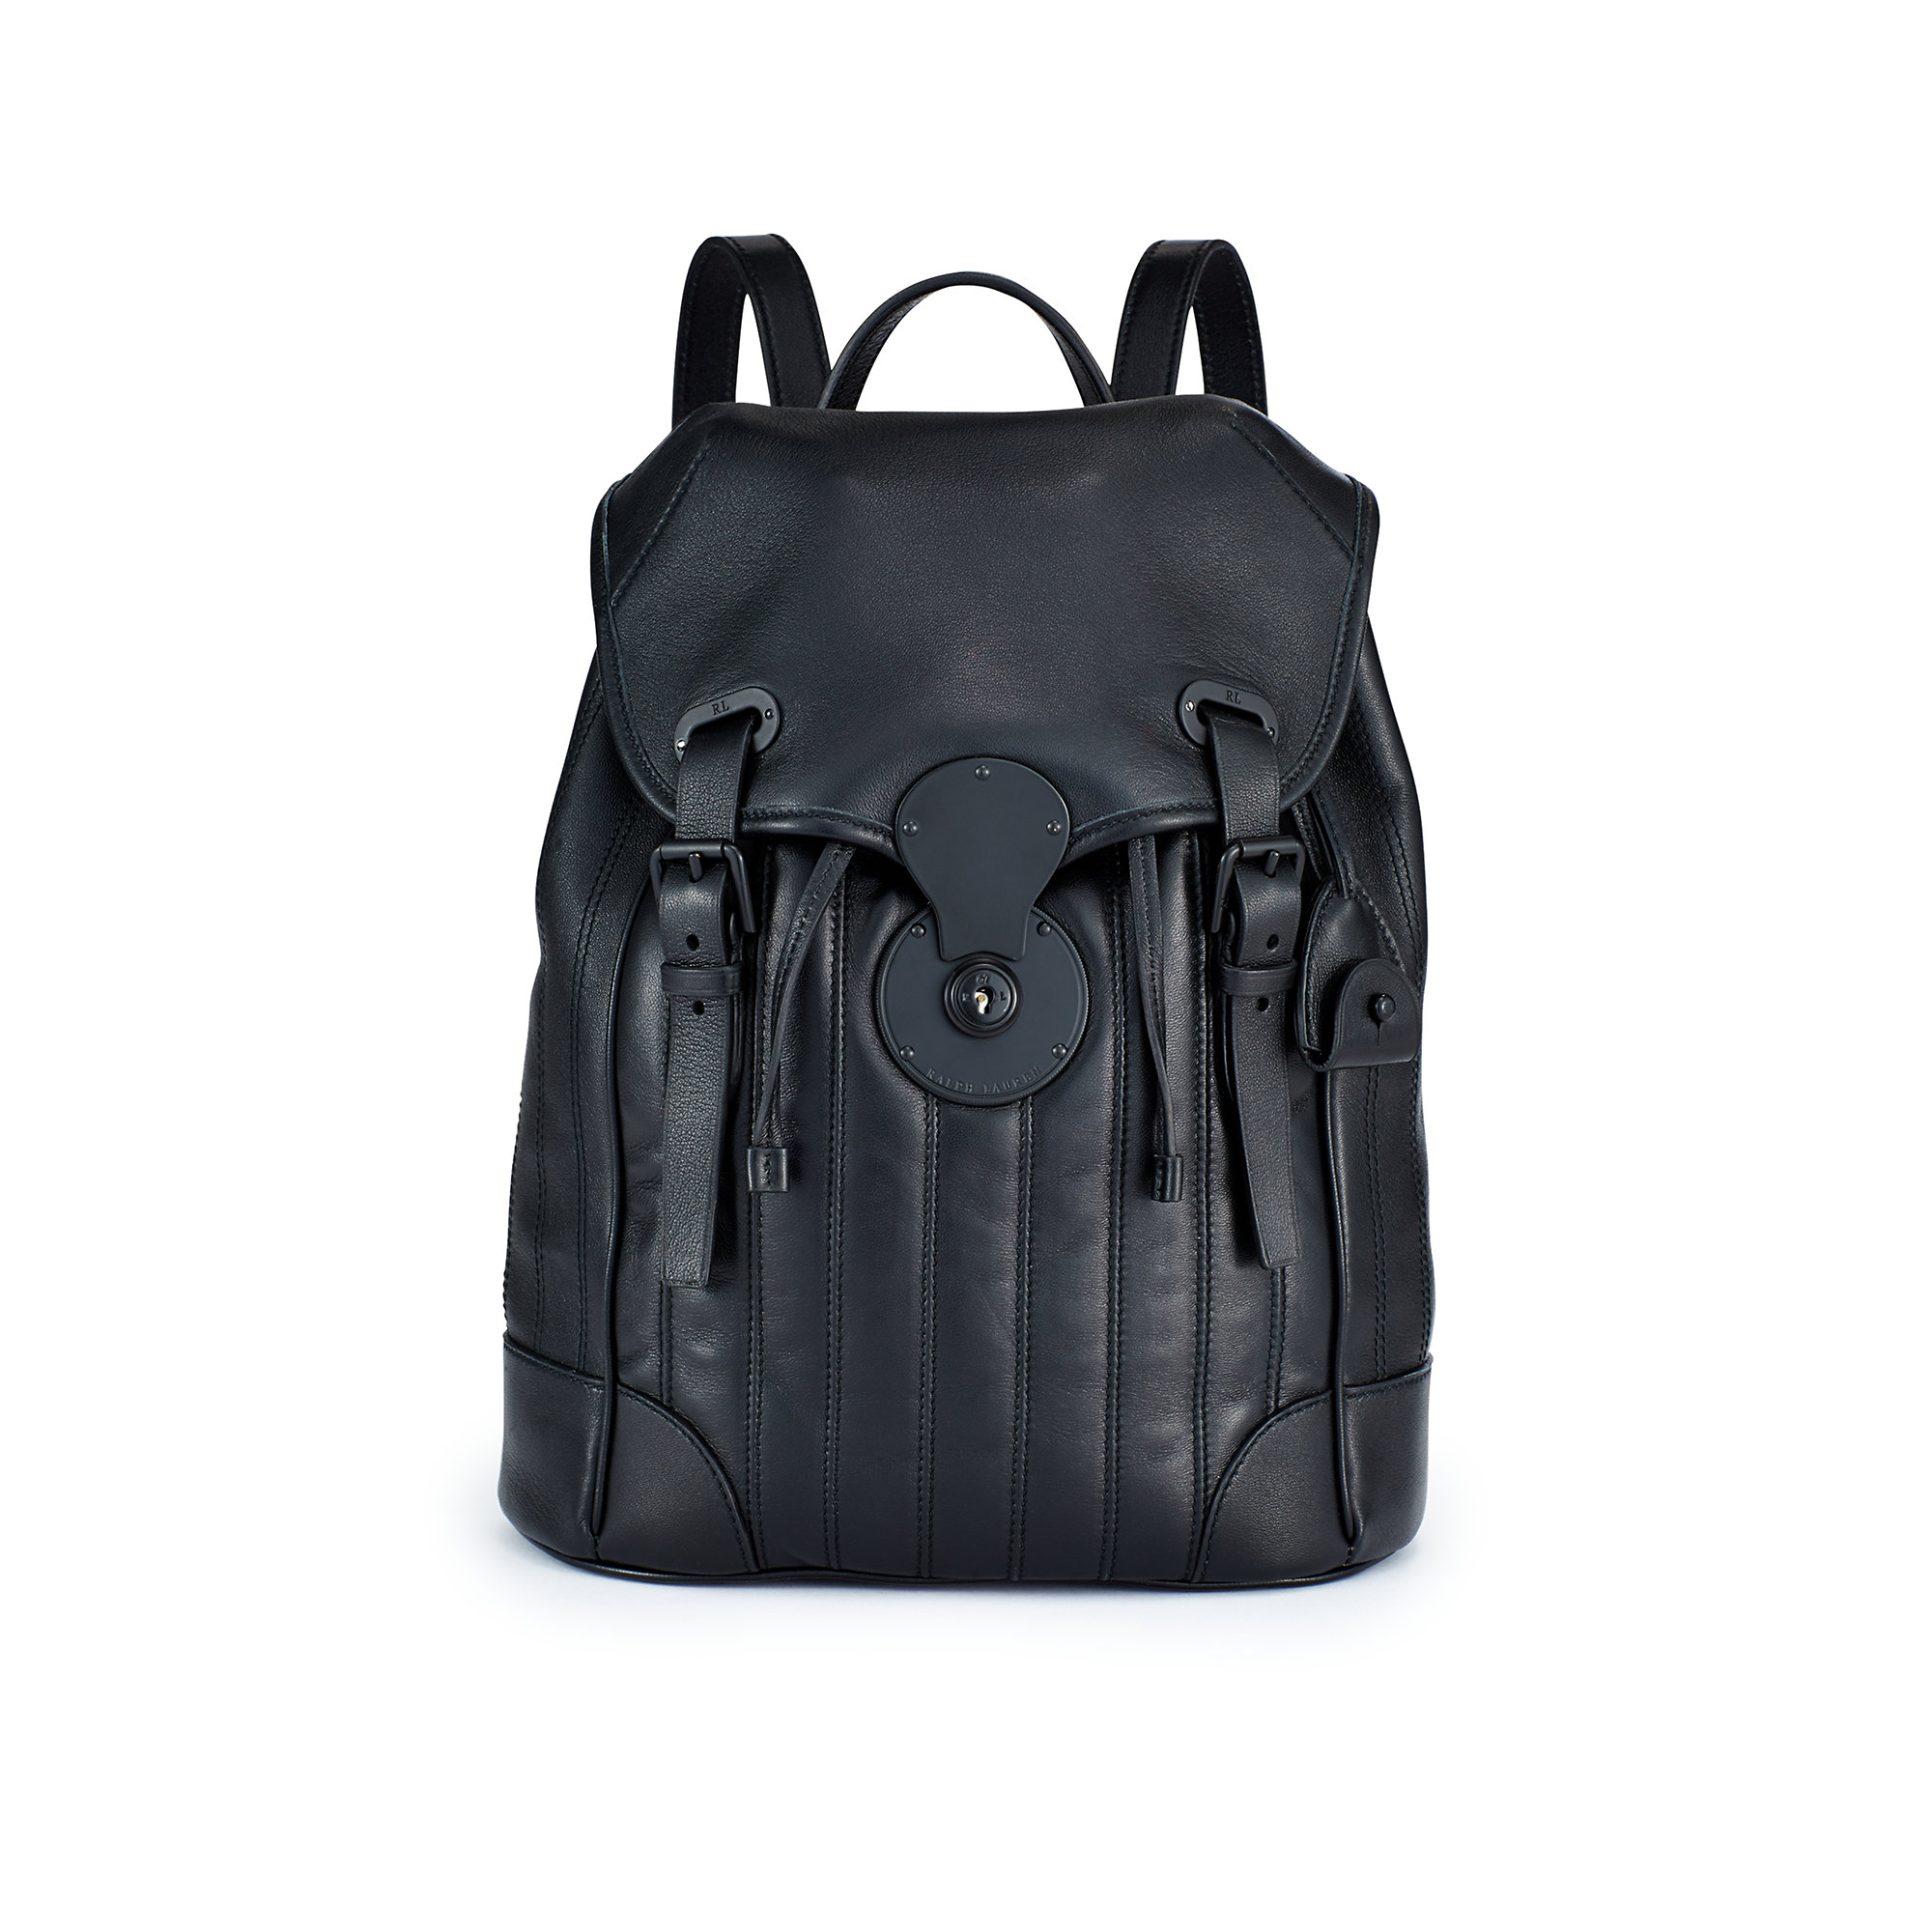 Ralph Lauren Quilted Ricky Backpack in Black - Lyst